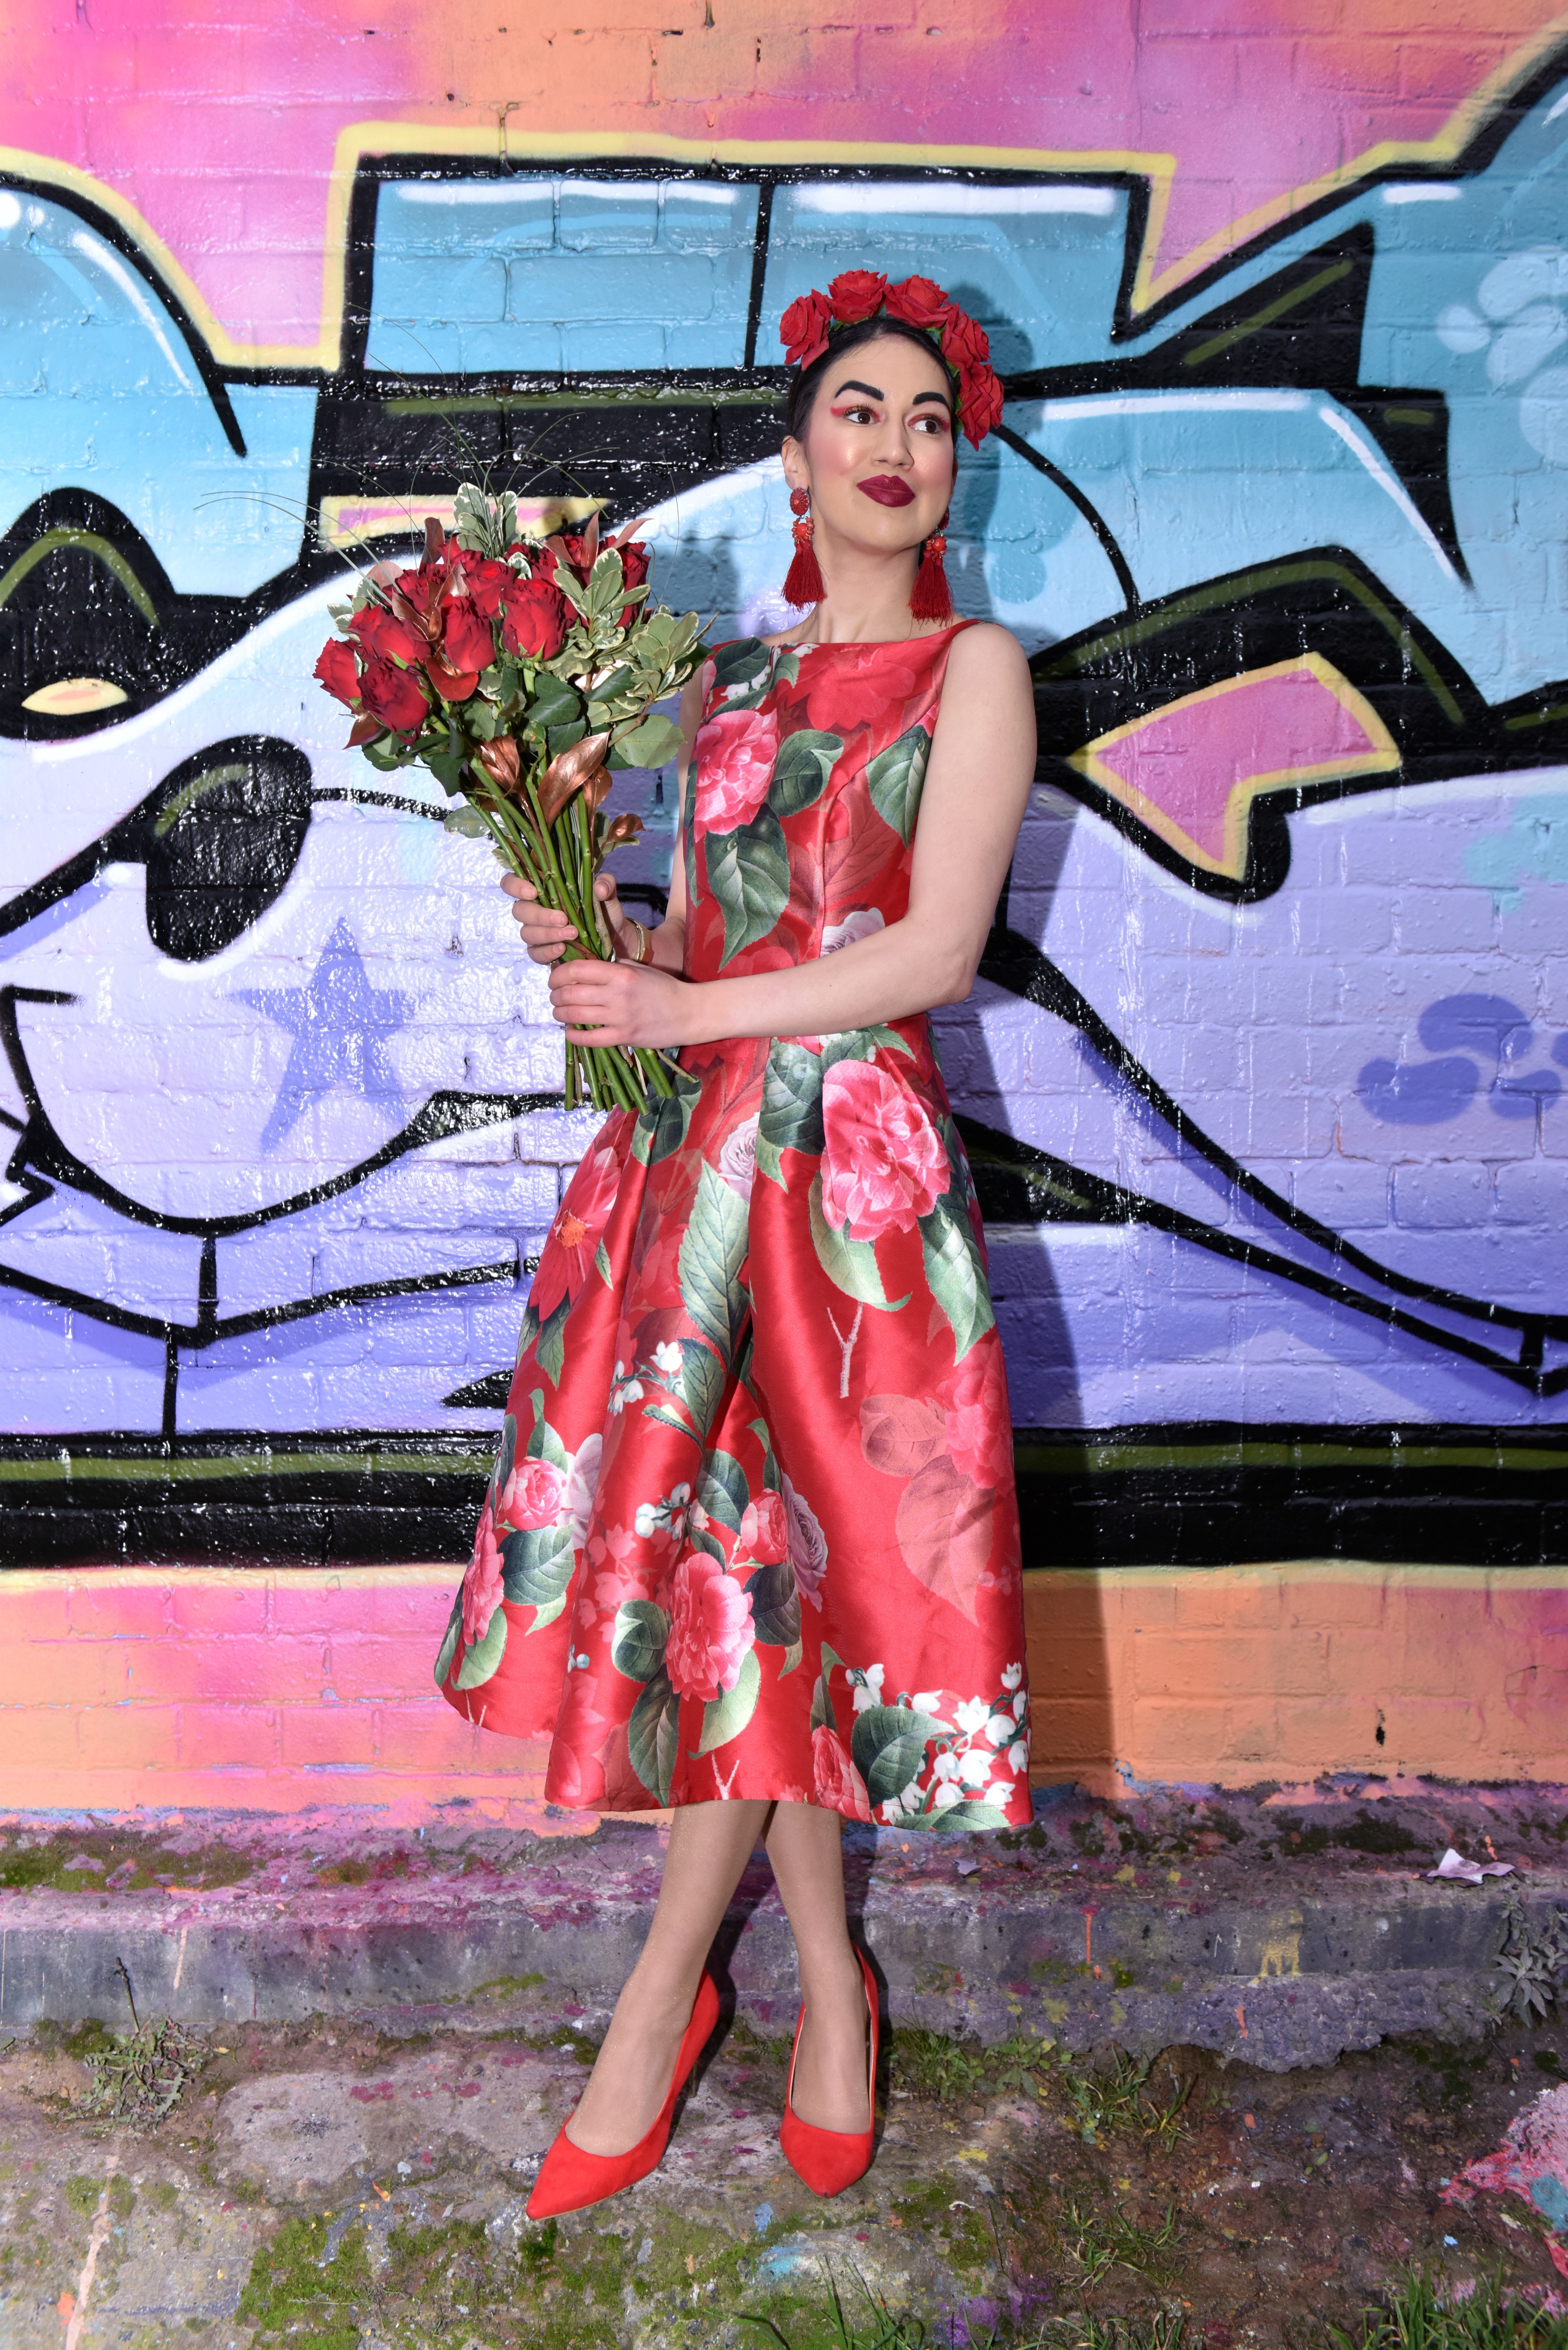 <img src="ana.jpg" alt="ana red floral and green dress dating dos and don'ts"/> 